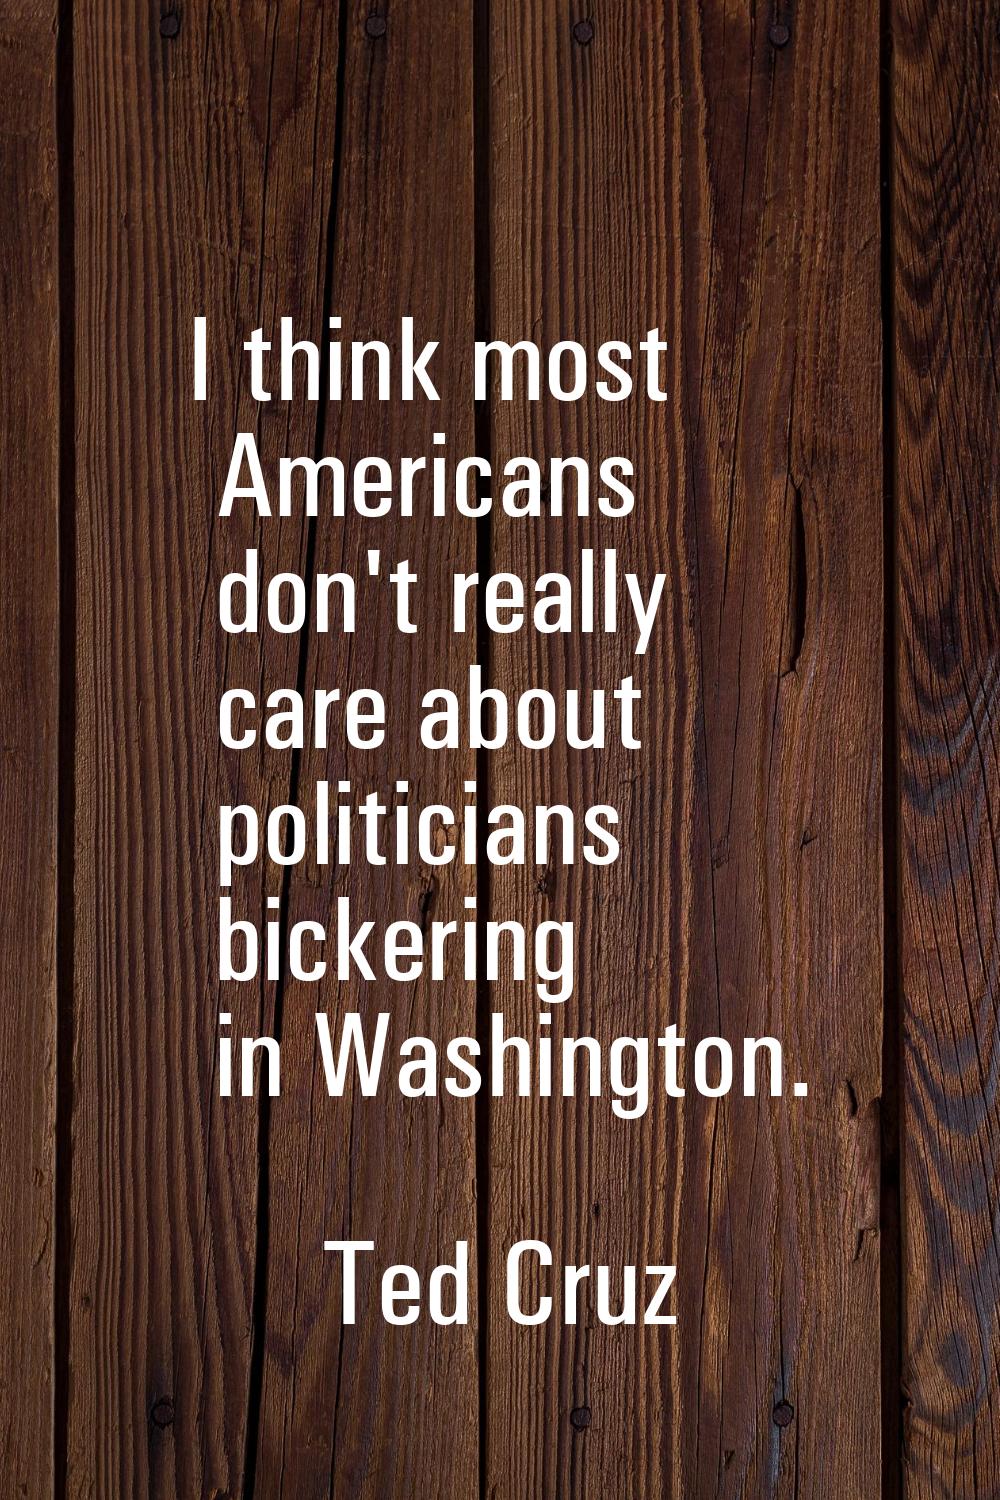 I think most Americans don't really care about politicians bickering in Washington.